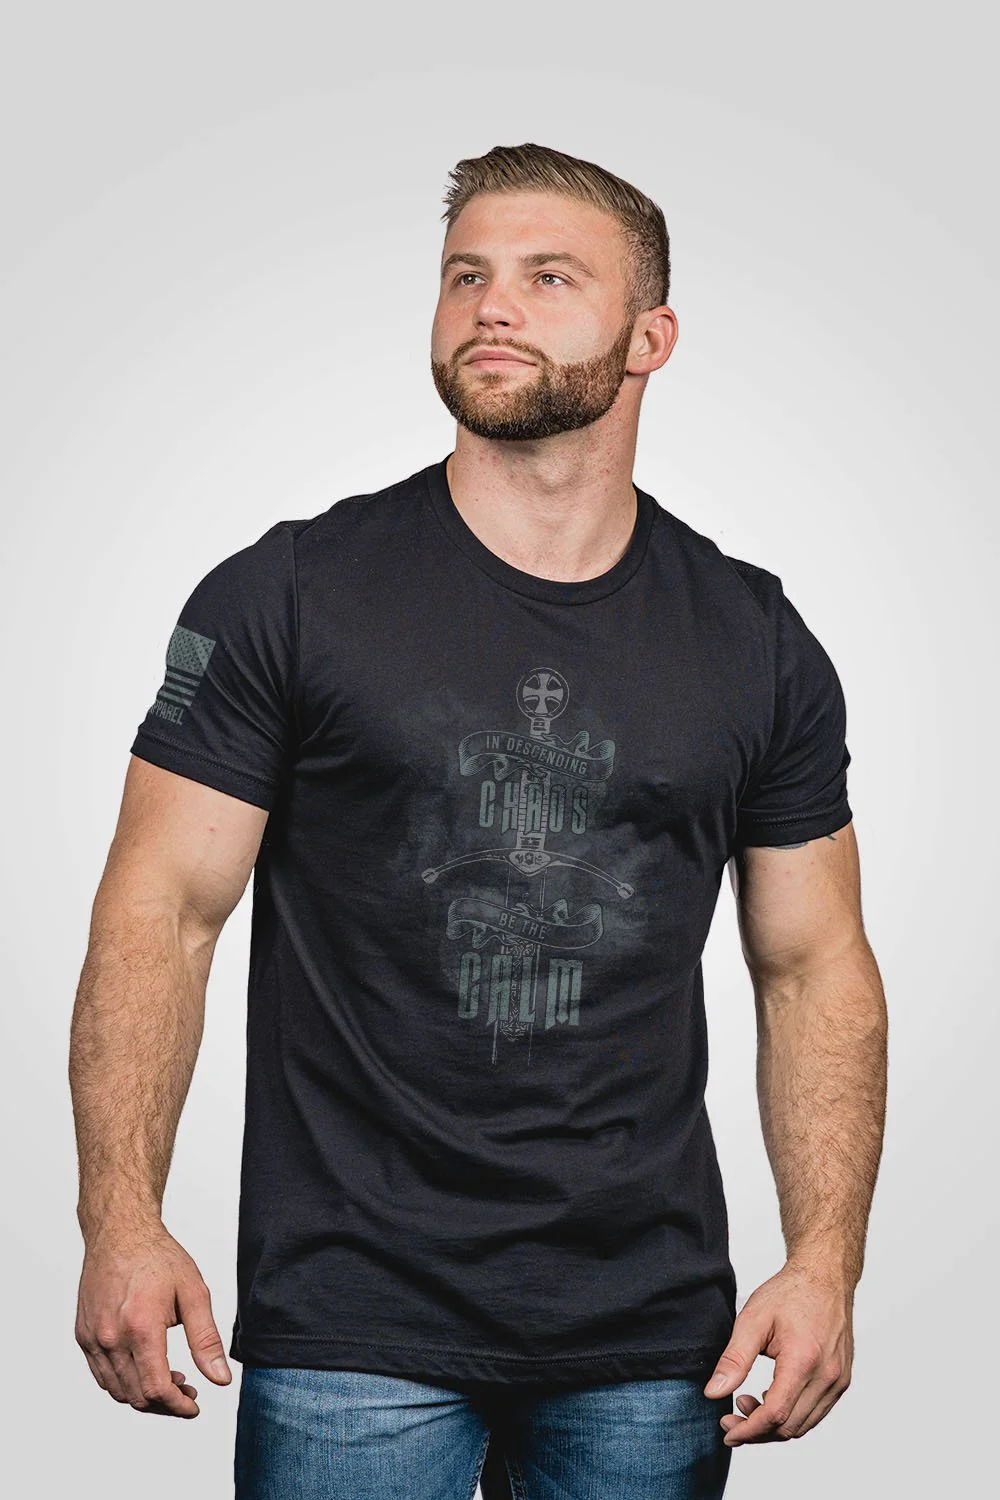 Nine Line Men's T-Shirt - Oz-Be The Calm posted by ProdOrigin USA in Men's Apparel